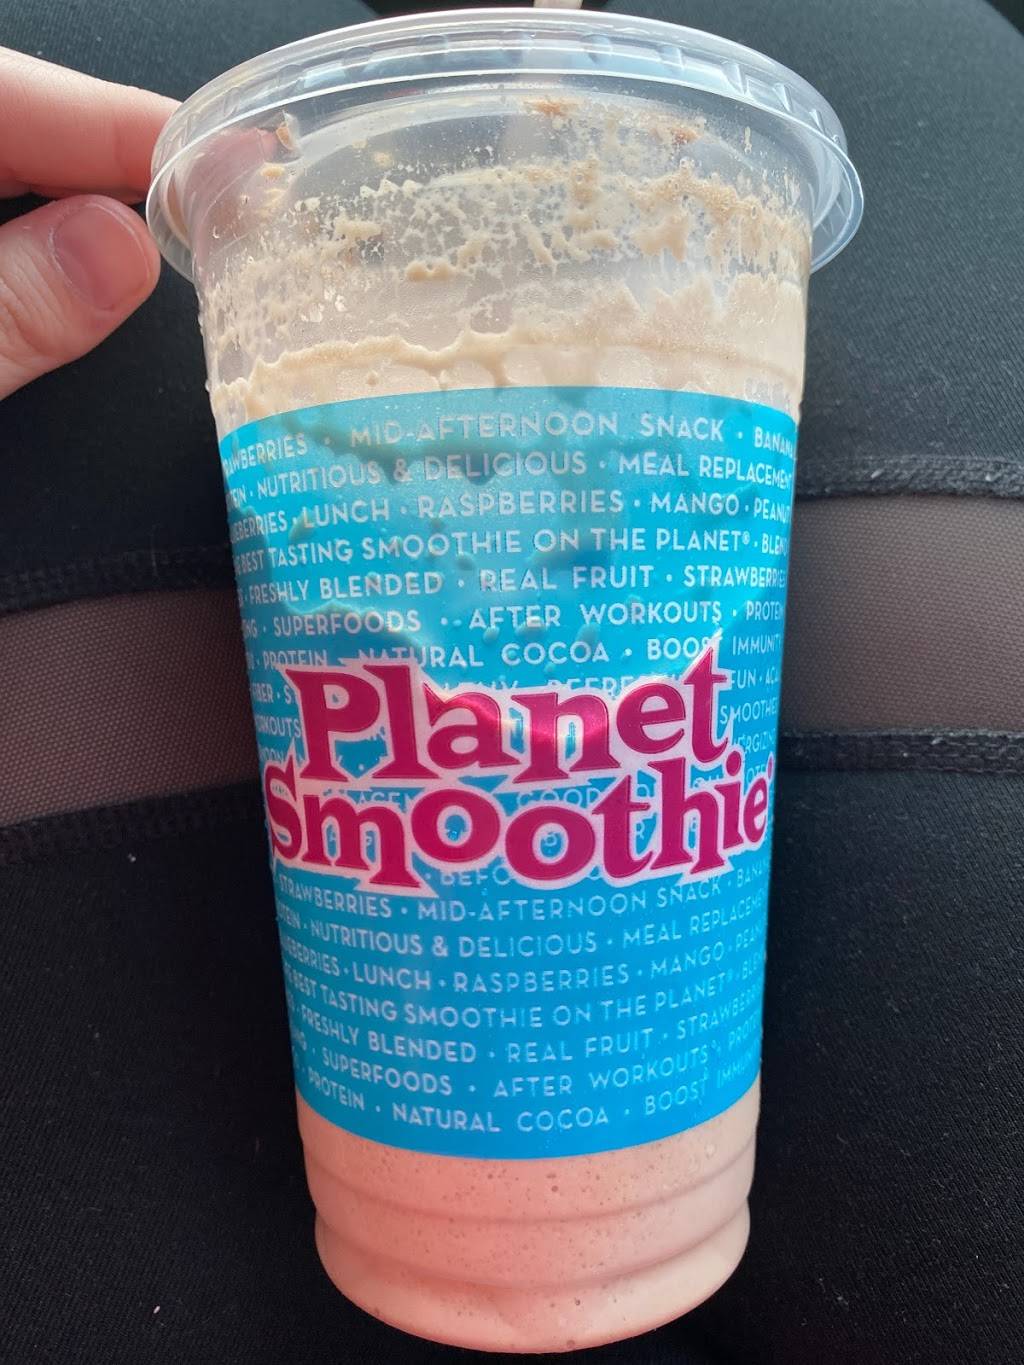 Planet Smoothie | 380 S State Rd 434 Suite 1003, Altamonte Springs, FL 32714, USA | Phone: (407) 682-2044